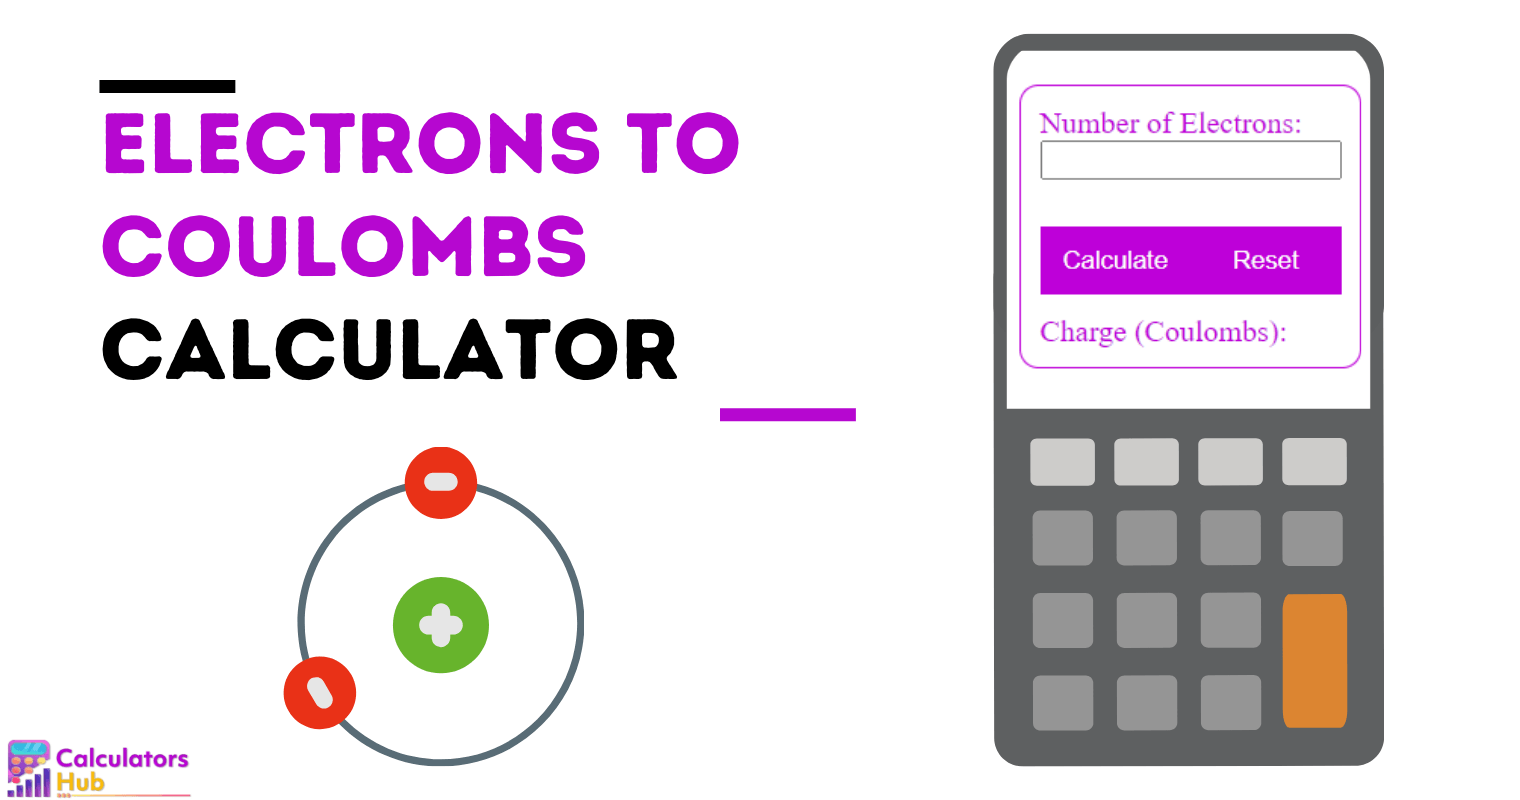 Electrons to Coulombs Calculator